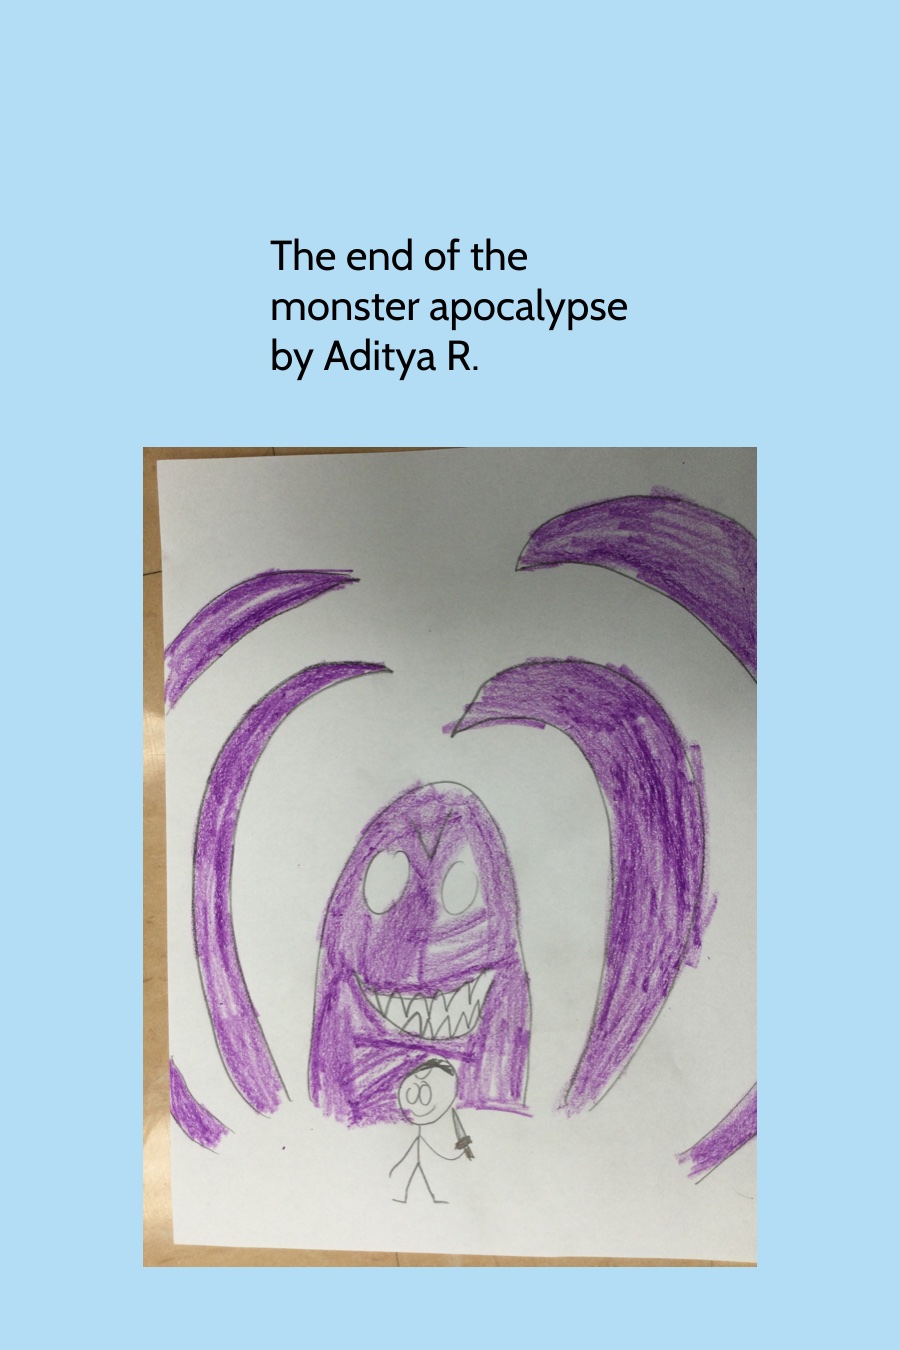 The End of the Monster Apocalypse by Aditya R